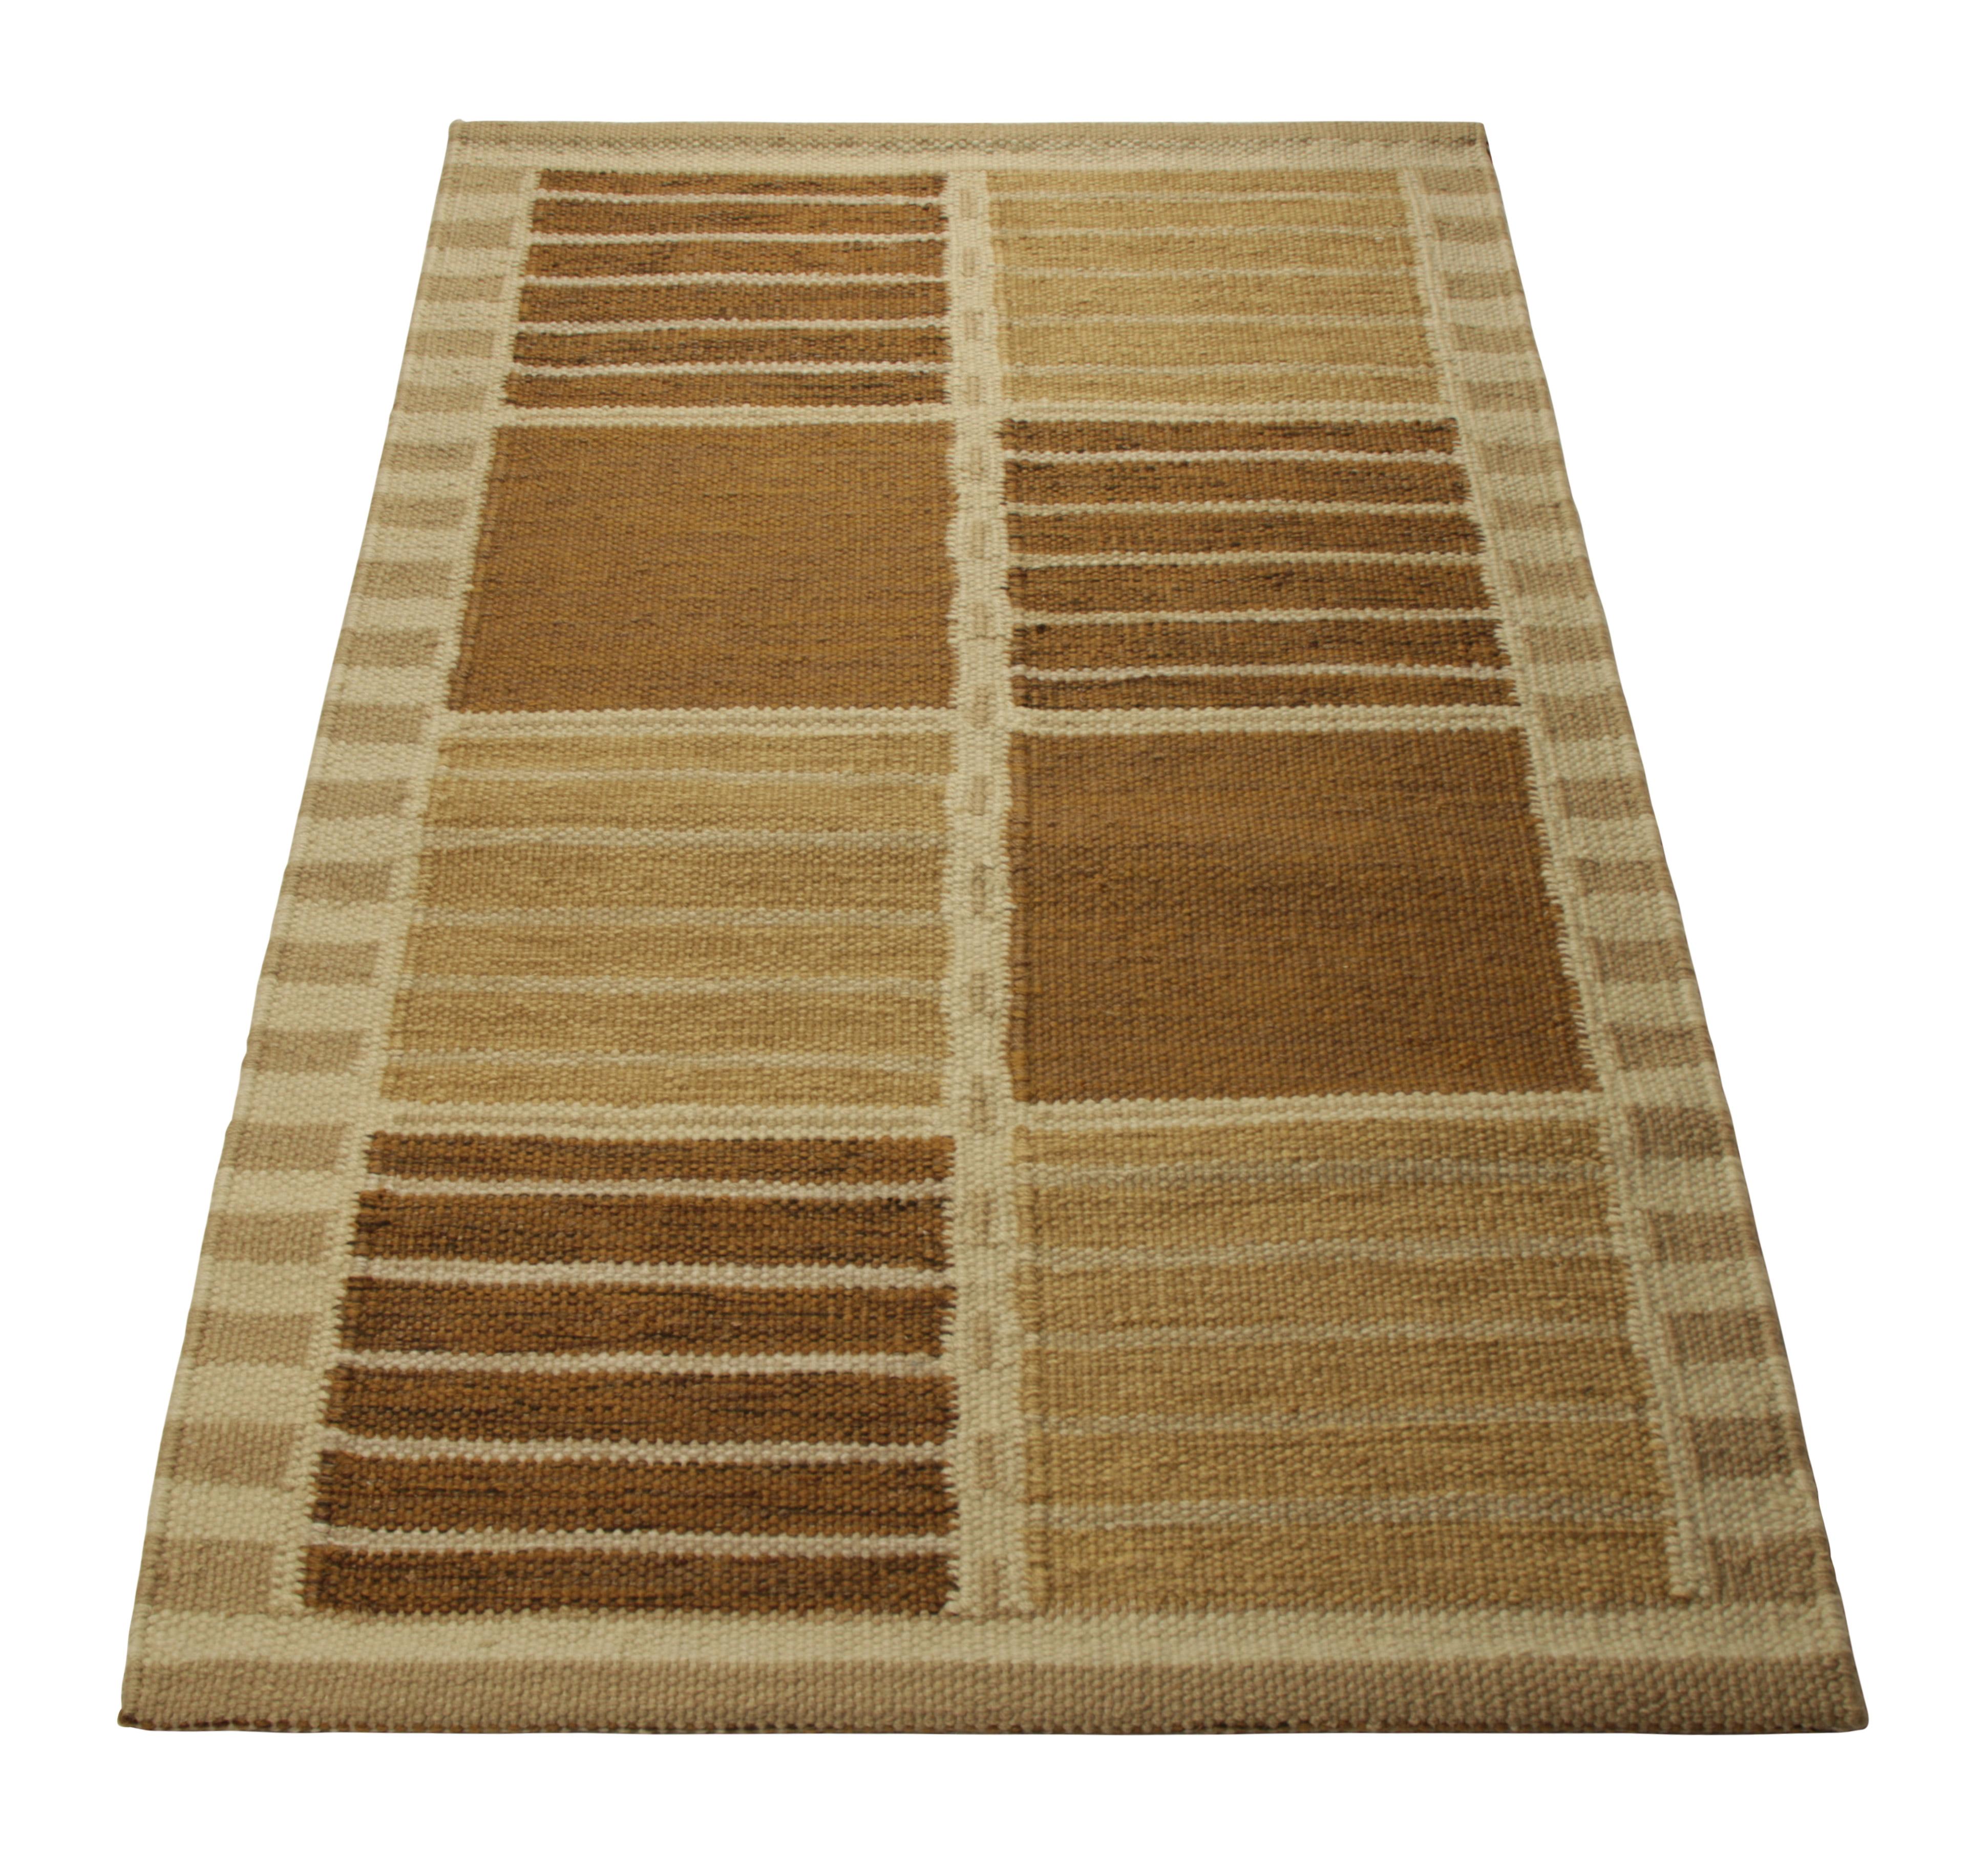 Hand-Woven Rug & Kilim’s Scandinavian Style Rug in Beige-Brown, with Geometric Stripes For Sale